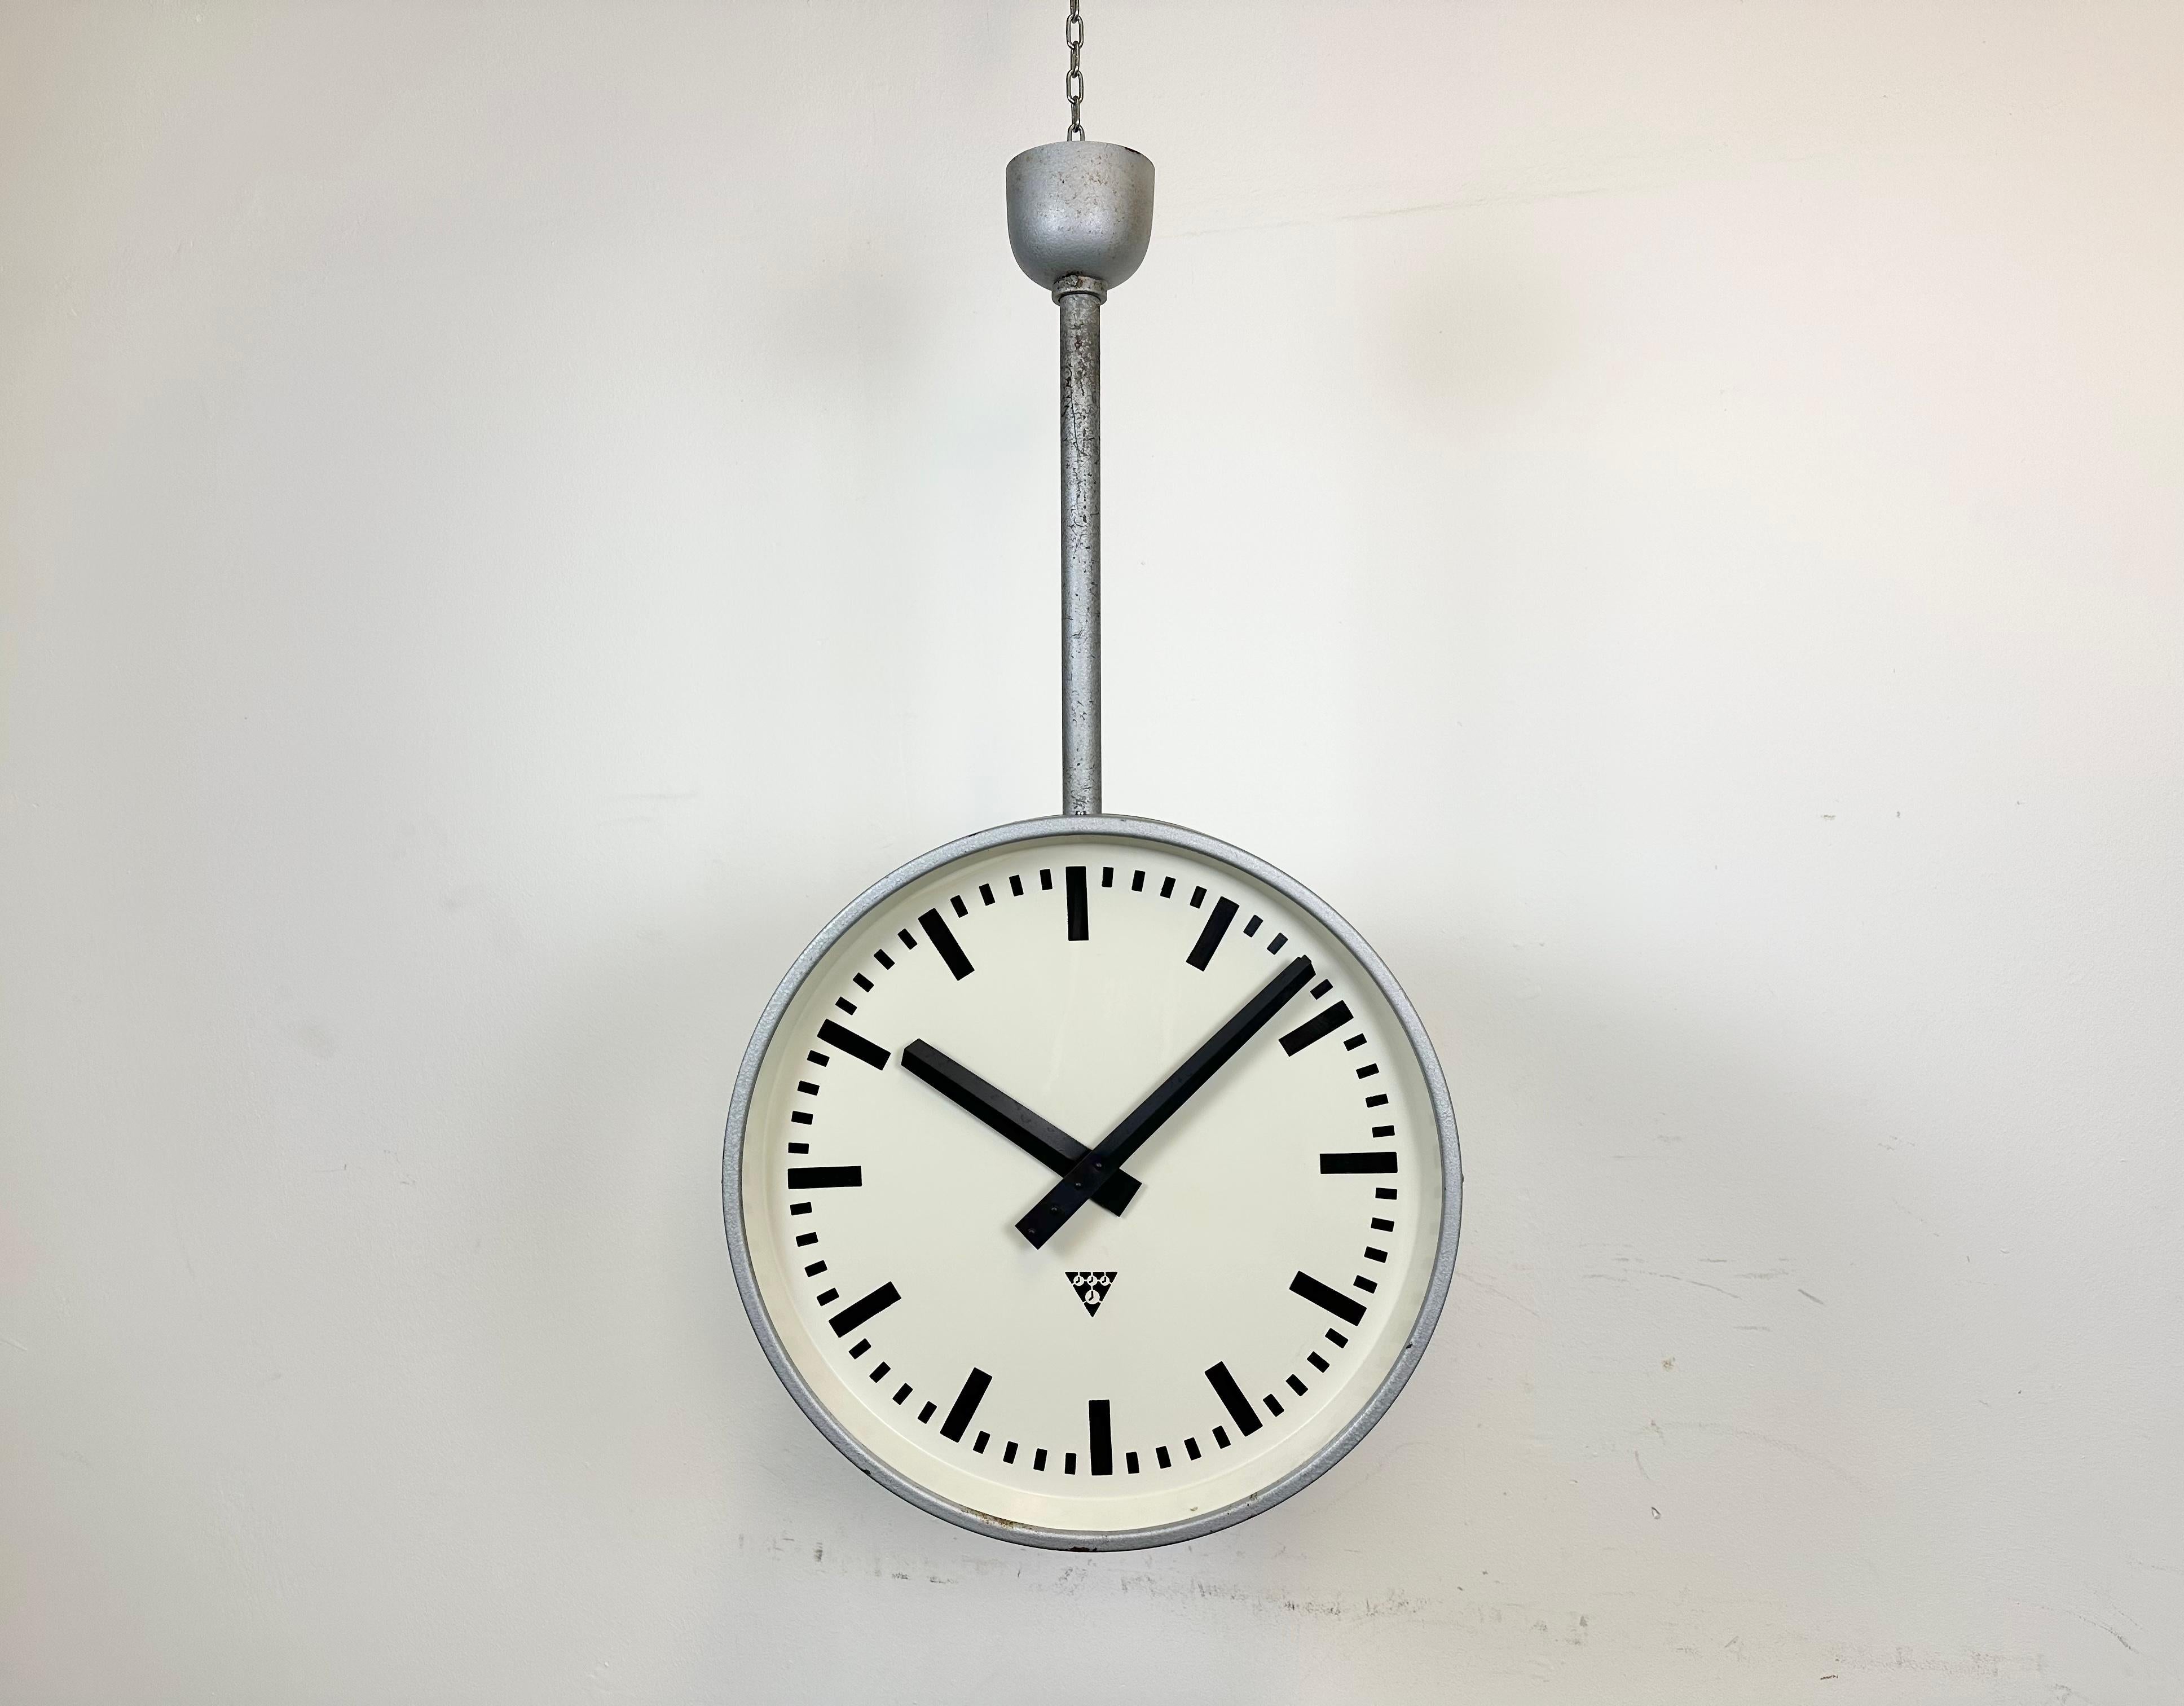 This large double-sided railway or factory clock was produced by Pragotron, in former Czechoslovakia, during the 1960s. The piece features a grey hammer paint metal body and a clear glass cover. The clock has been converted into a battery-powered